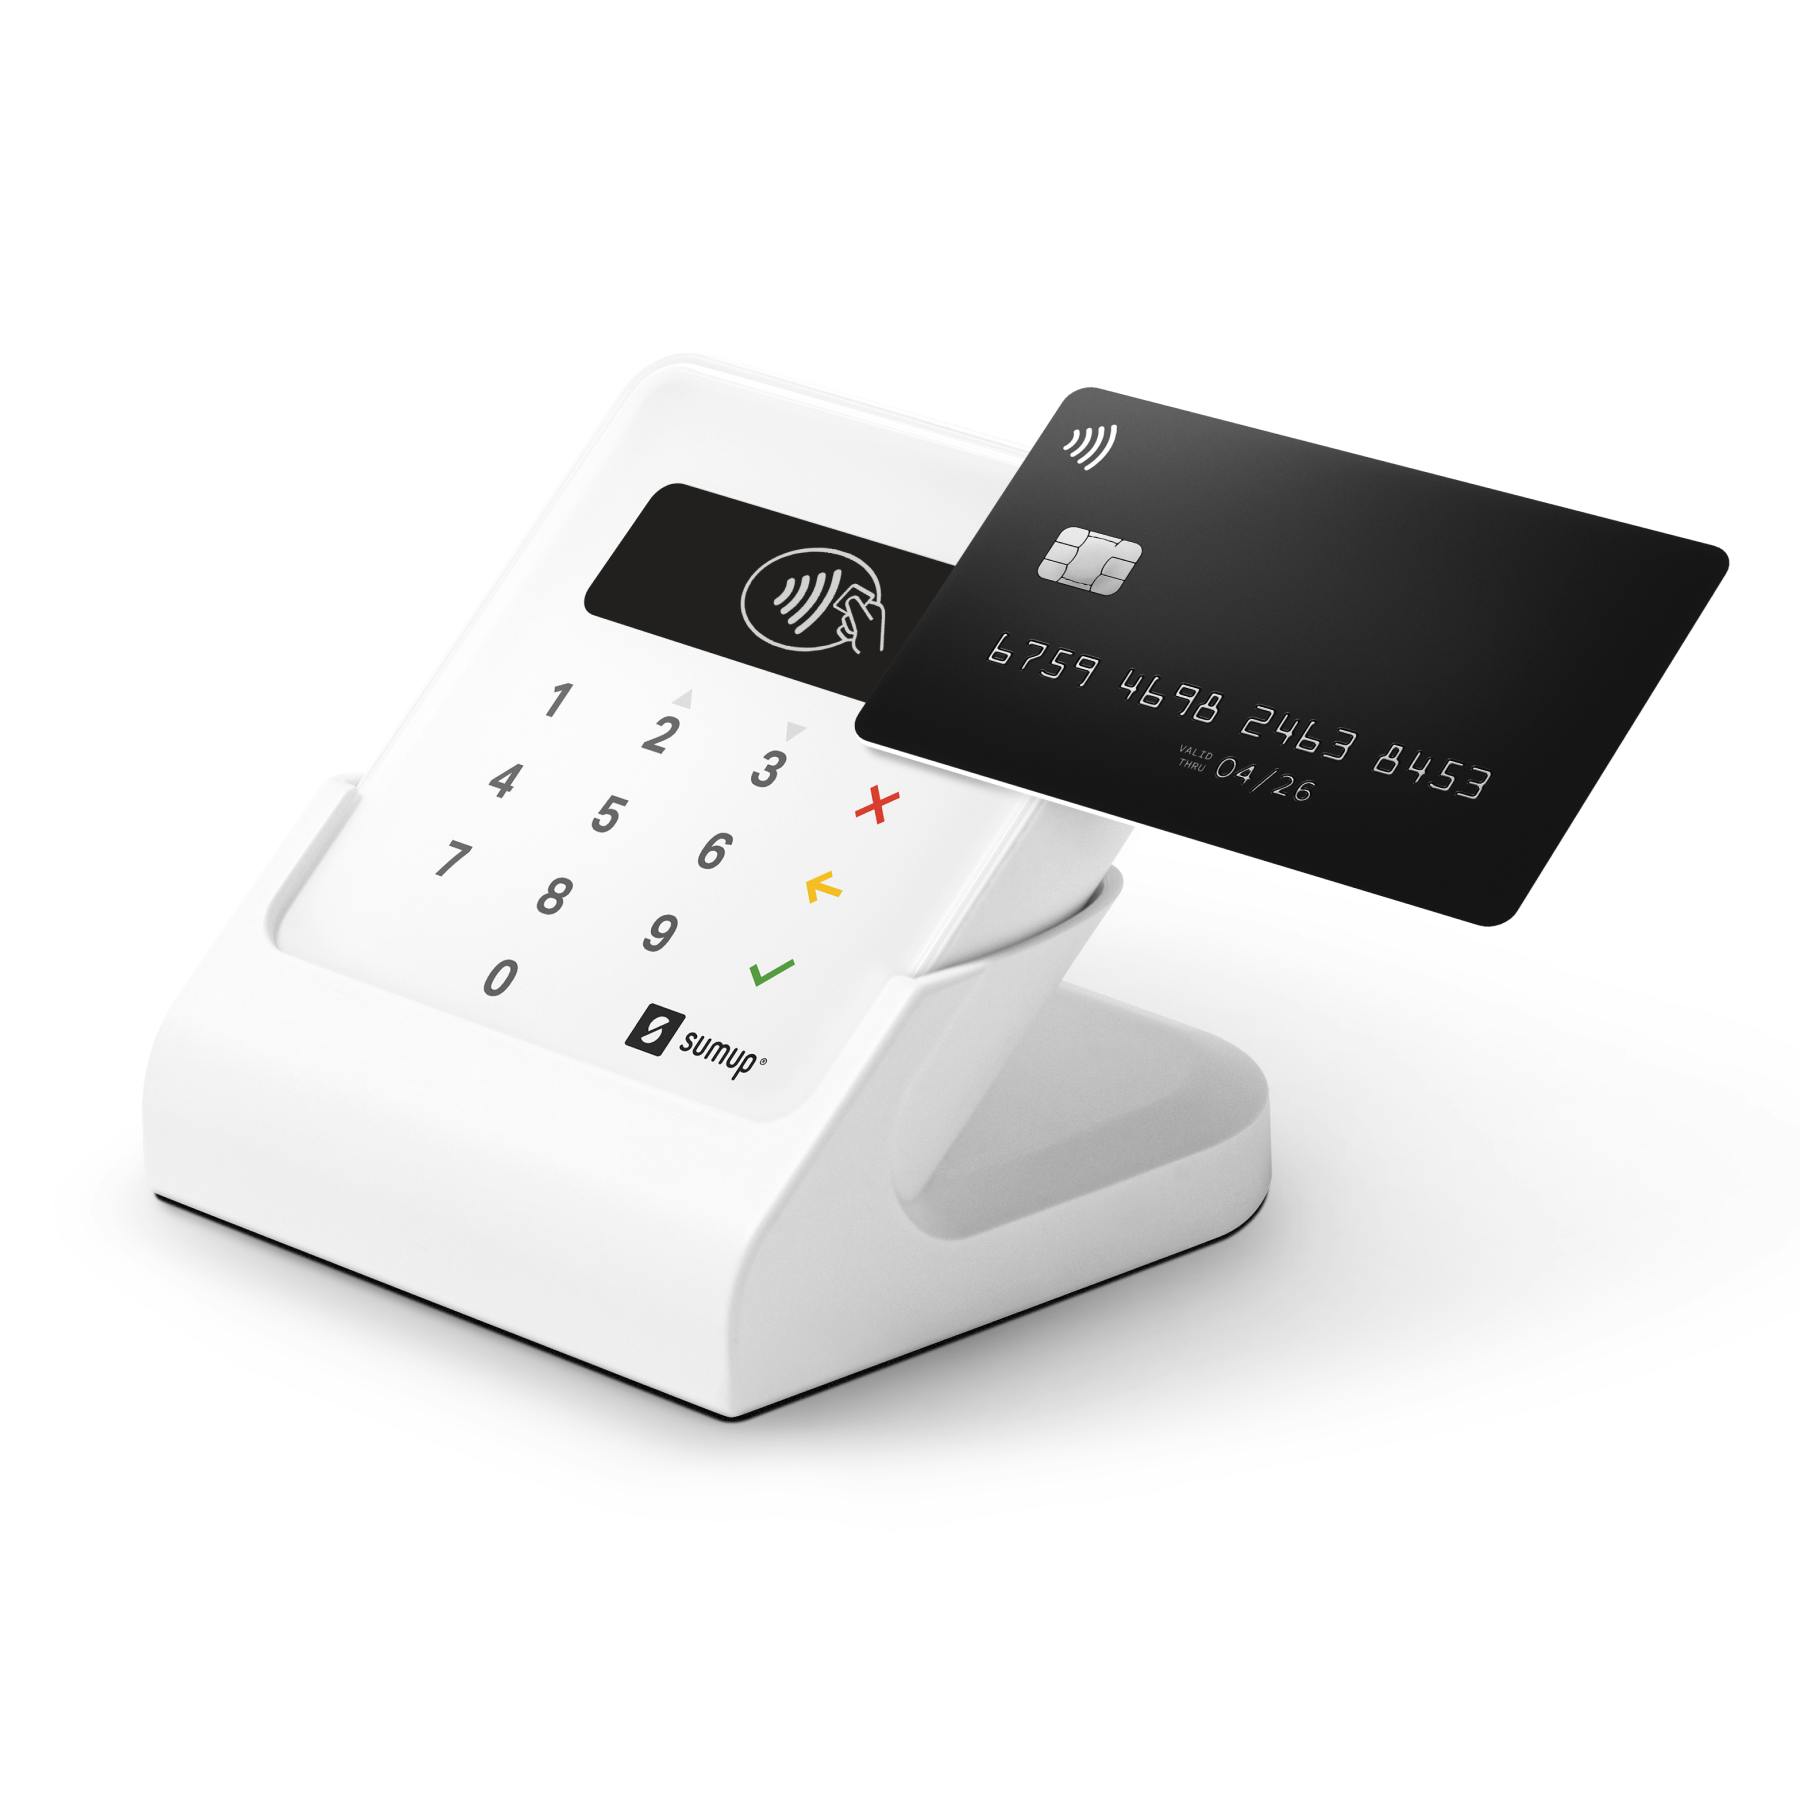 Card Reader Definition - What is Card Reader by SLR Lounge